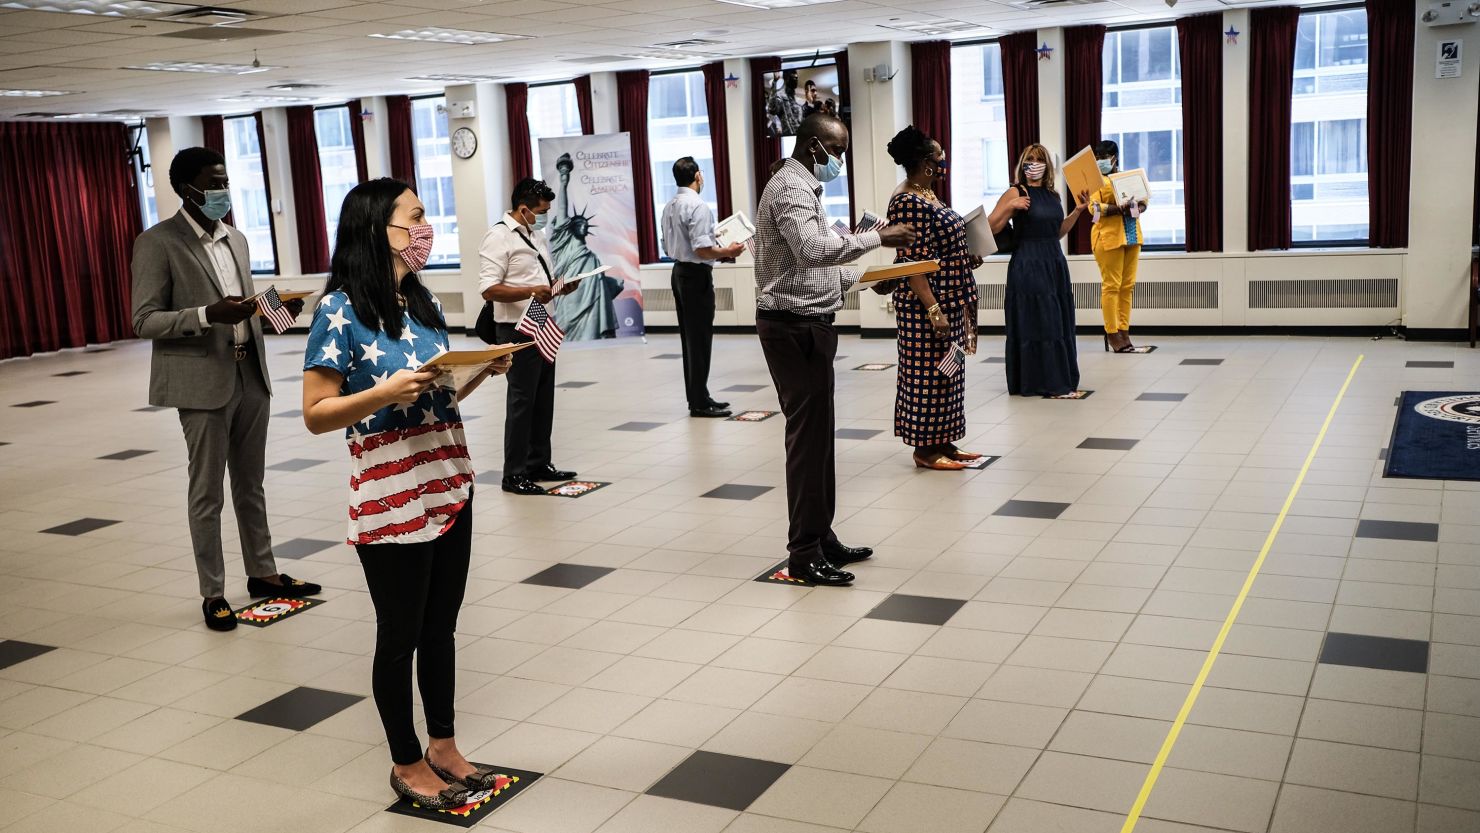 People are sworn in as new American citizens during a ceremony at the U.S. Citizenship and Immigration Services New York Field Office on July 2, 2020 in New York City. The ceremonies were brief and observed precautions, like wearing a mask and adhering to social distancing, to limit exposure to the coronavirus for those in attendance.